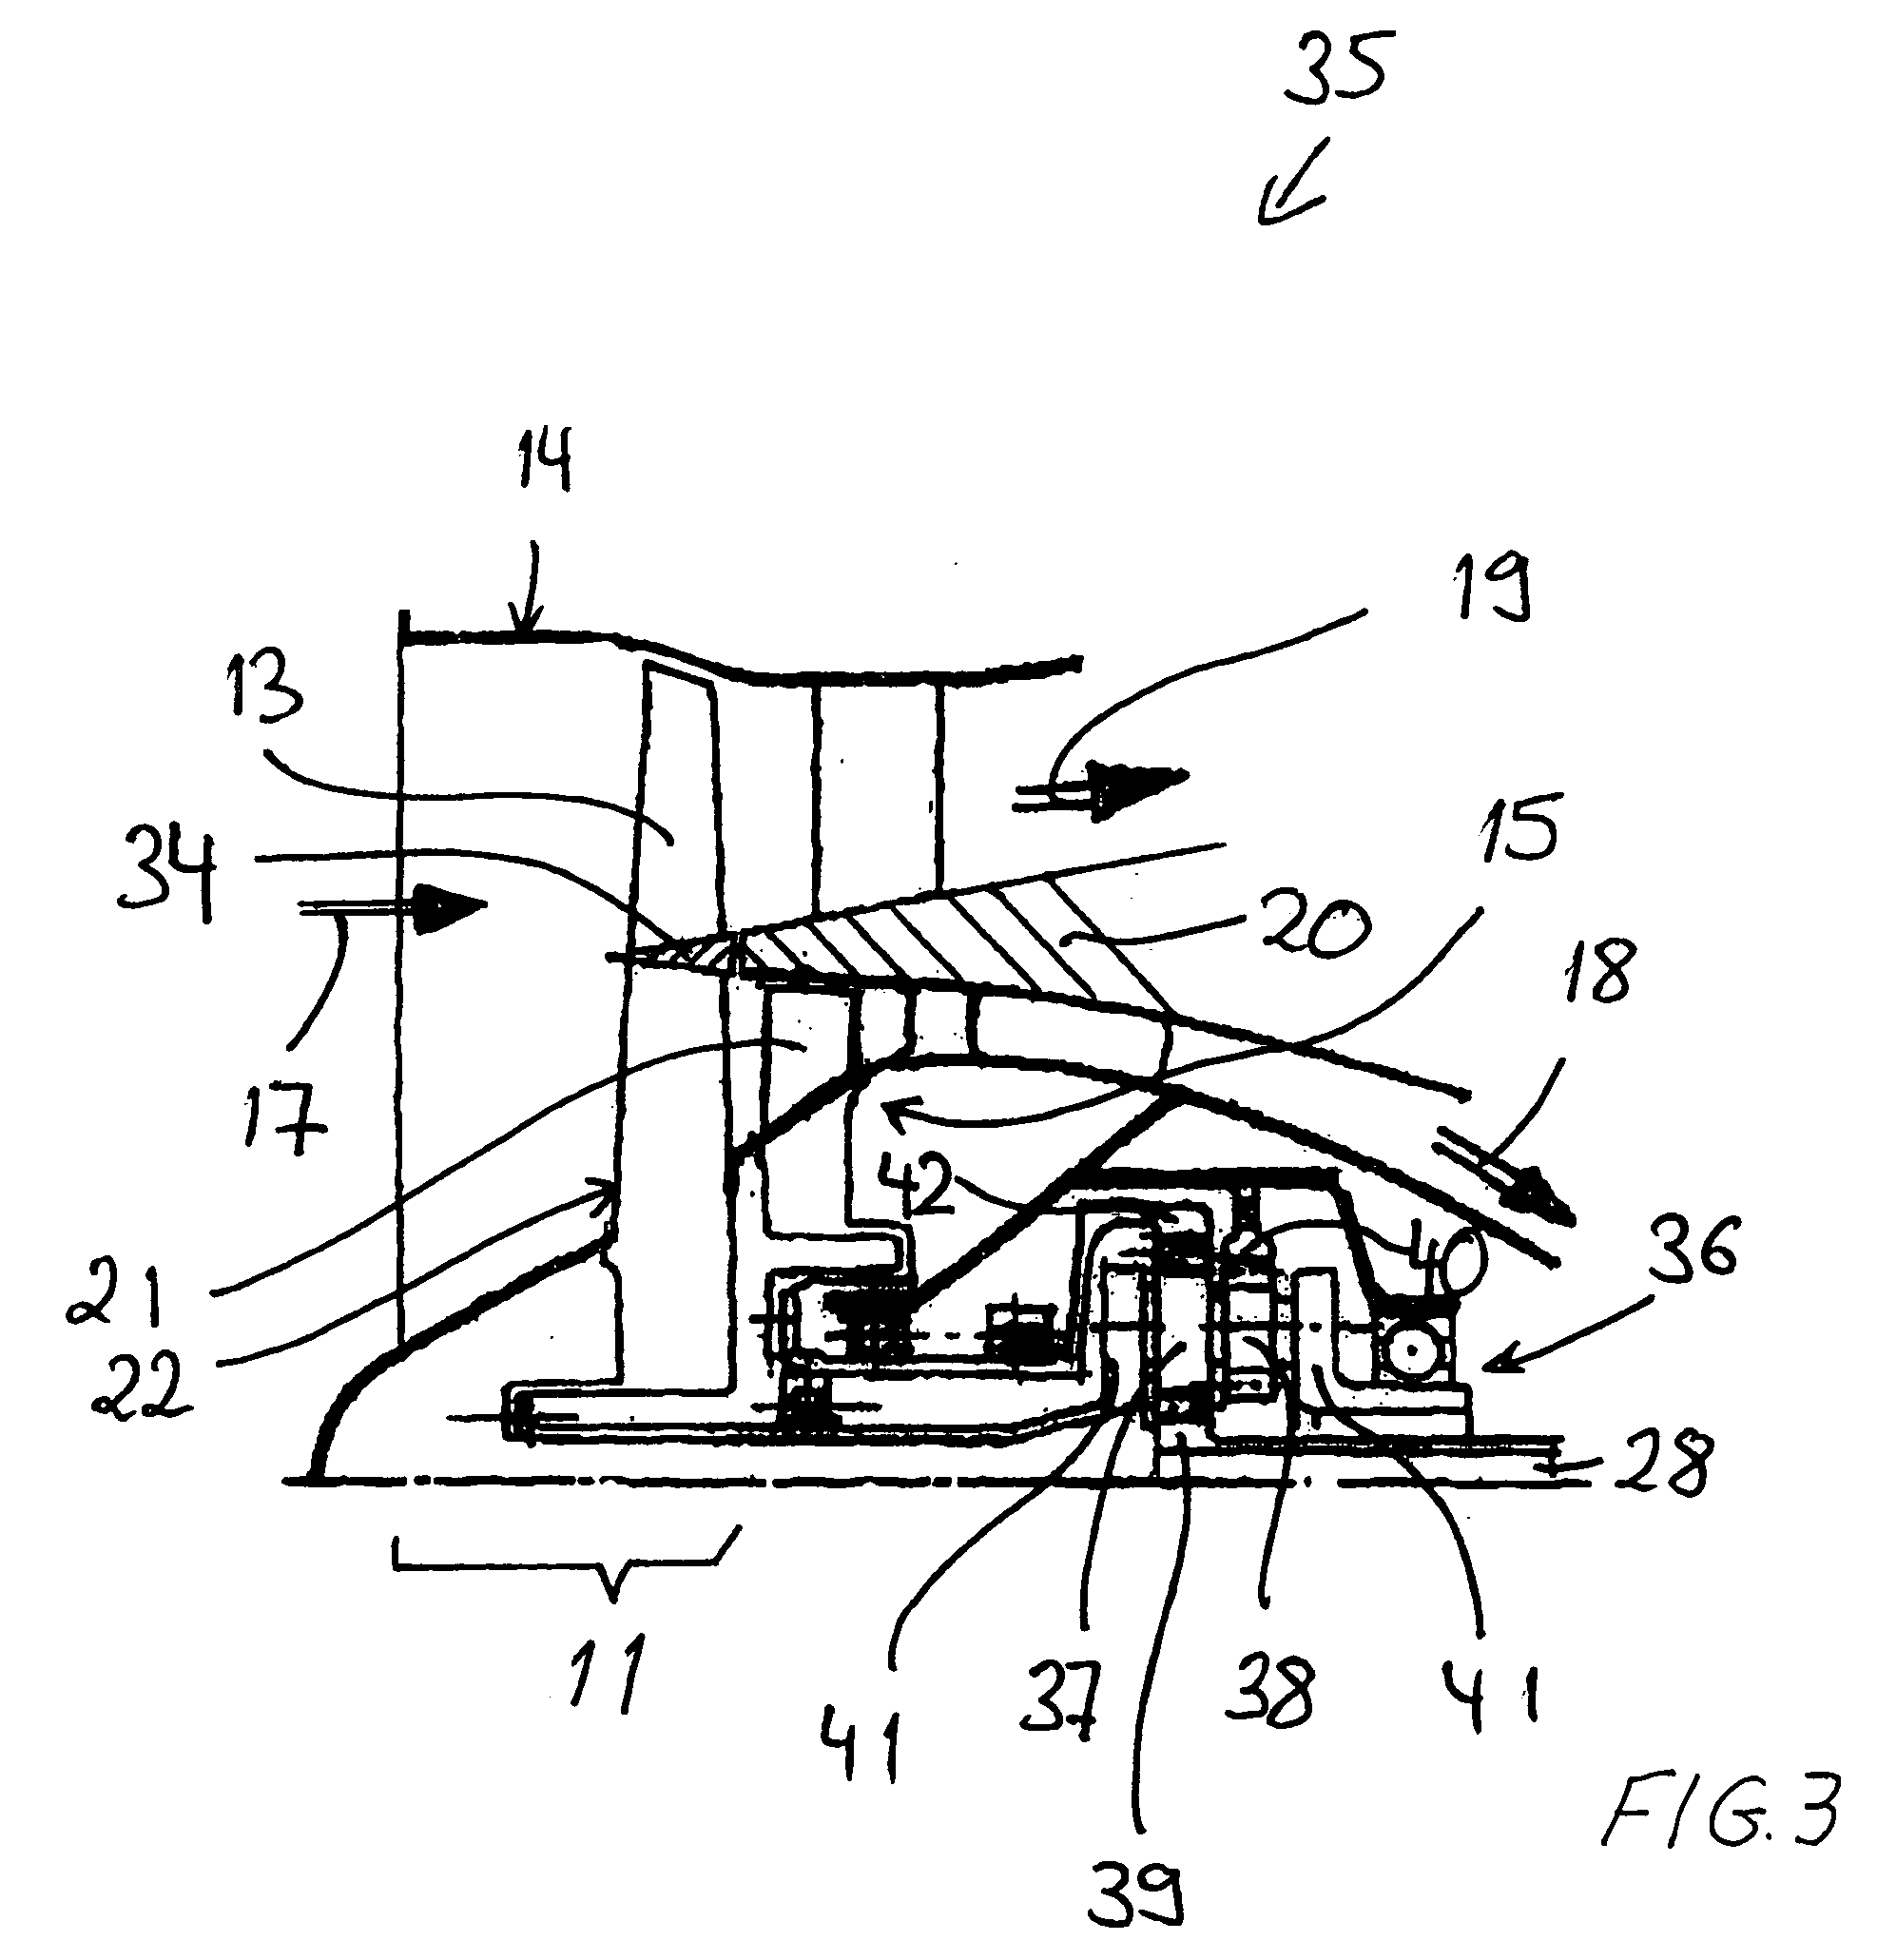 Jet engine with compact arrangement of fan